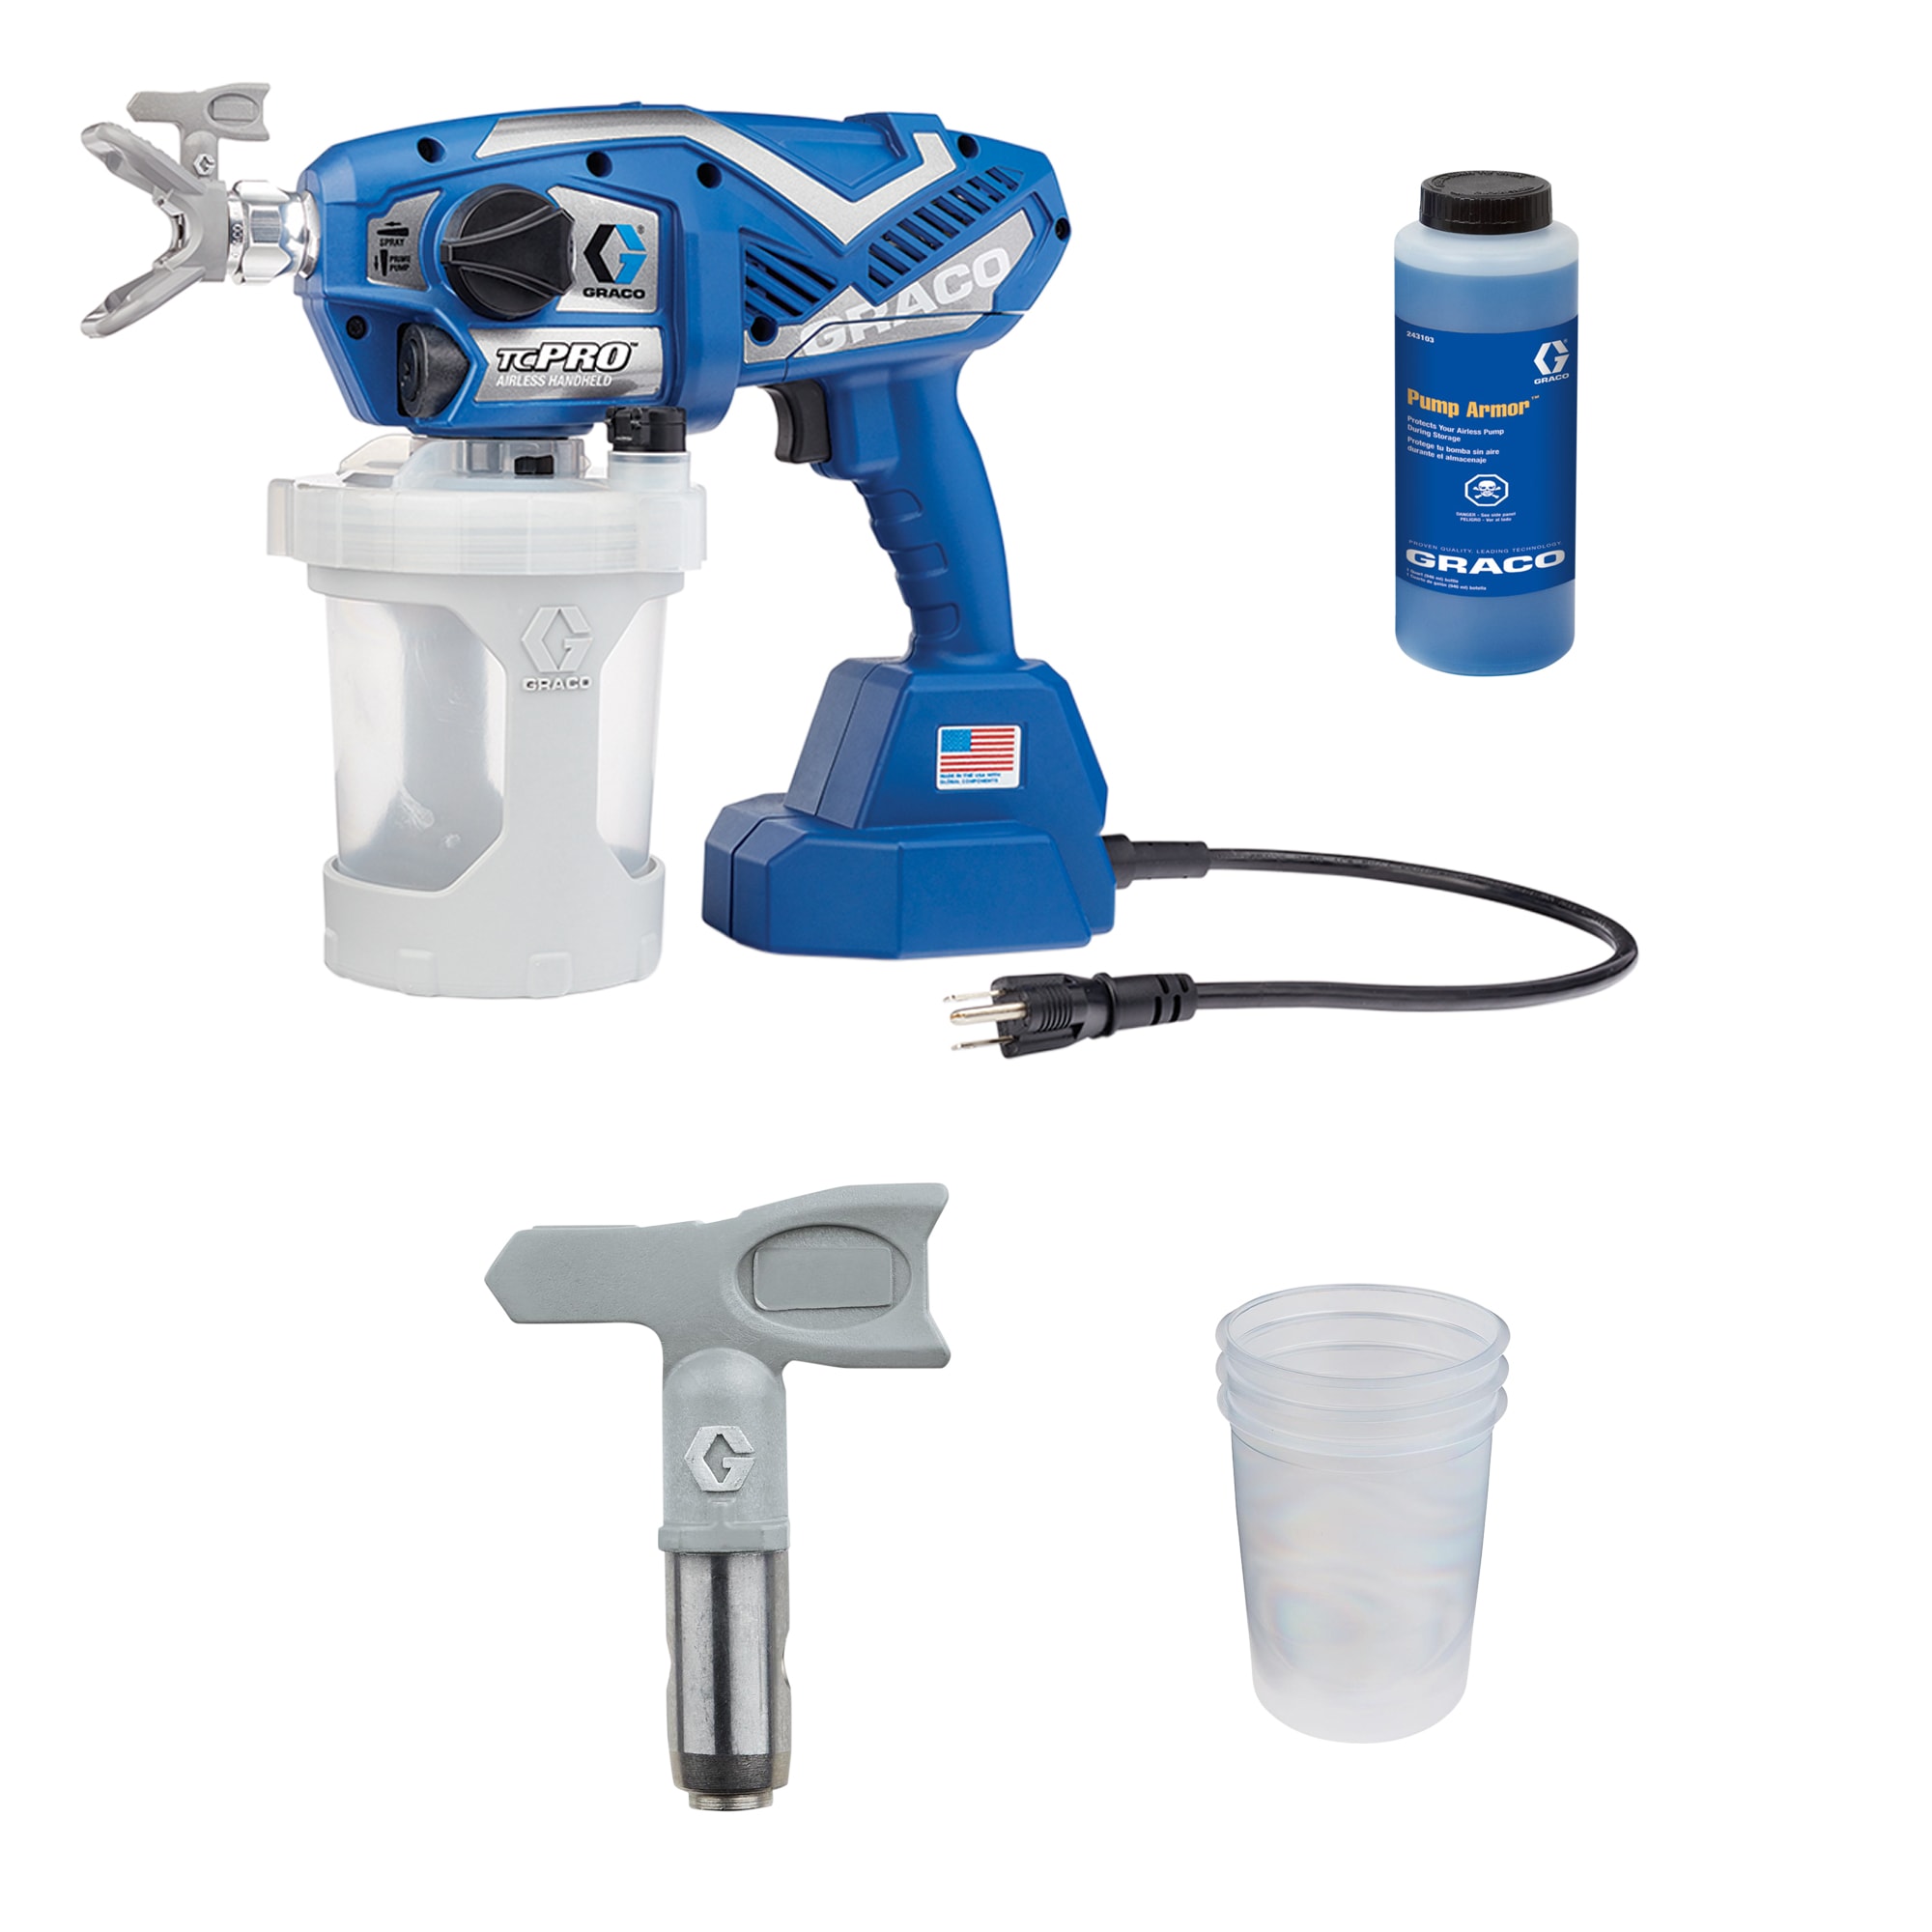 NuMax Sps14 Pneumatic 1.4mm Tip HVLP Gravity Feed Spray Gun with 600cc Plastic Cup